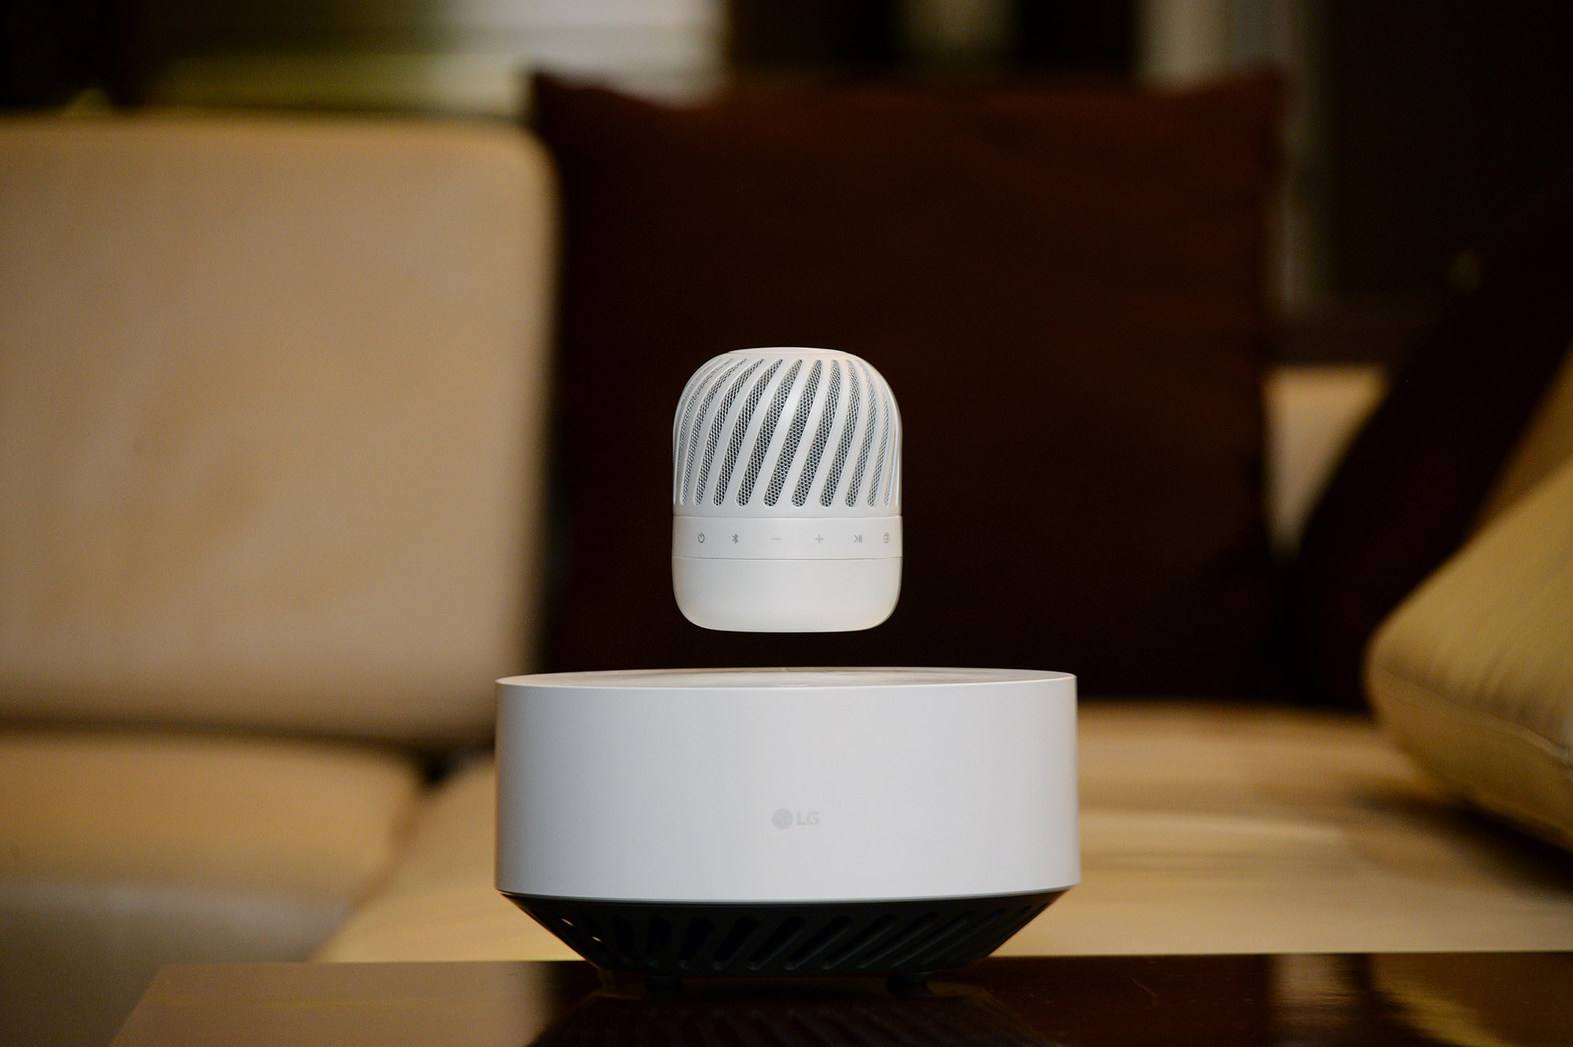 LG's Levitating Speaker Expected To Mesmerize Audiences At CES 2017